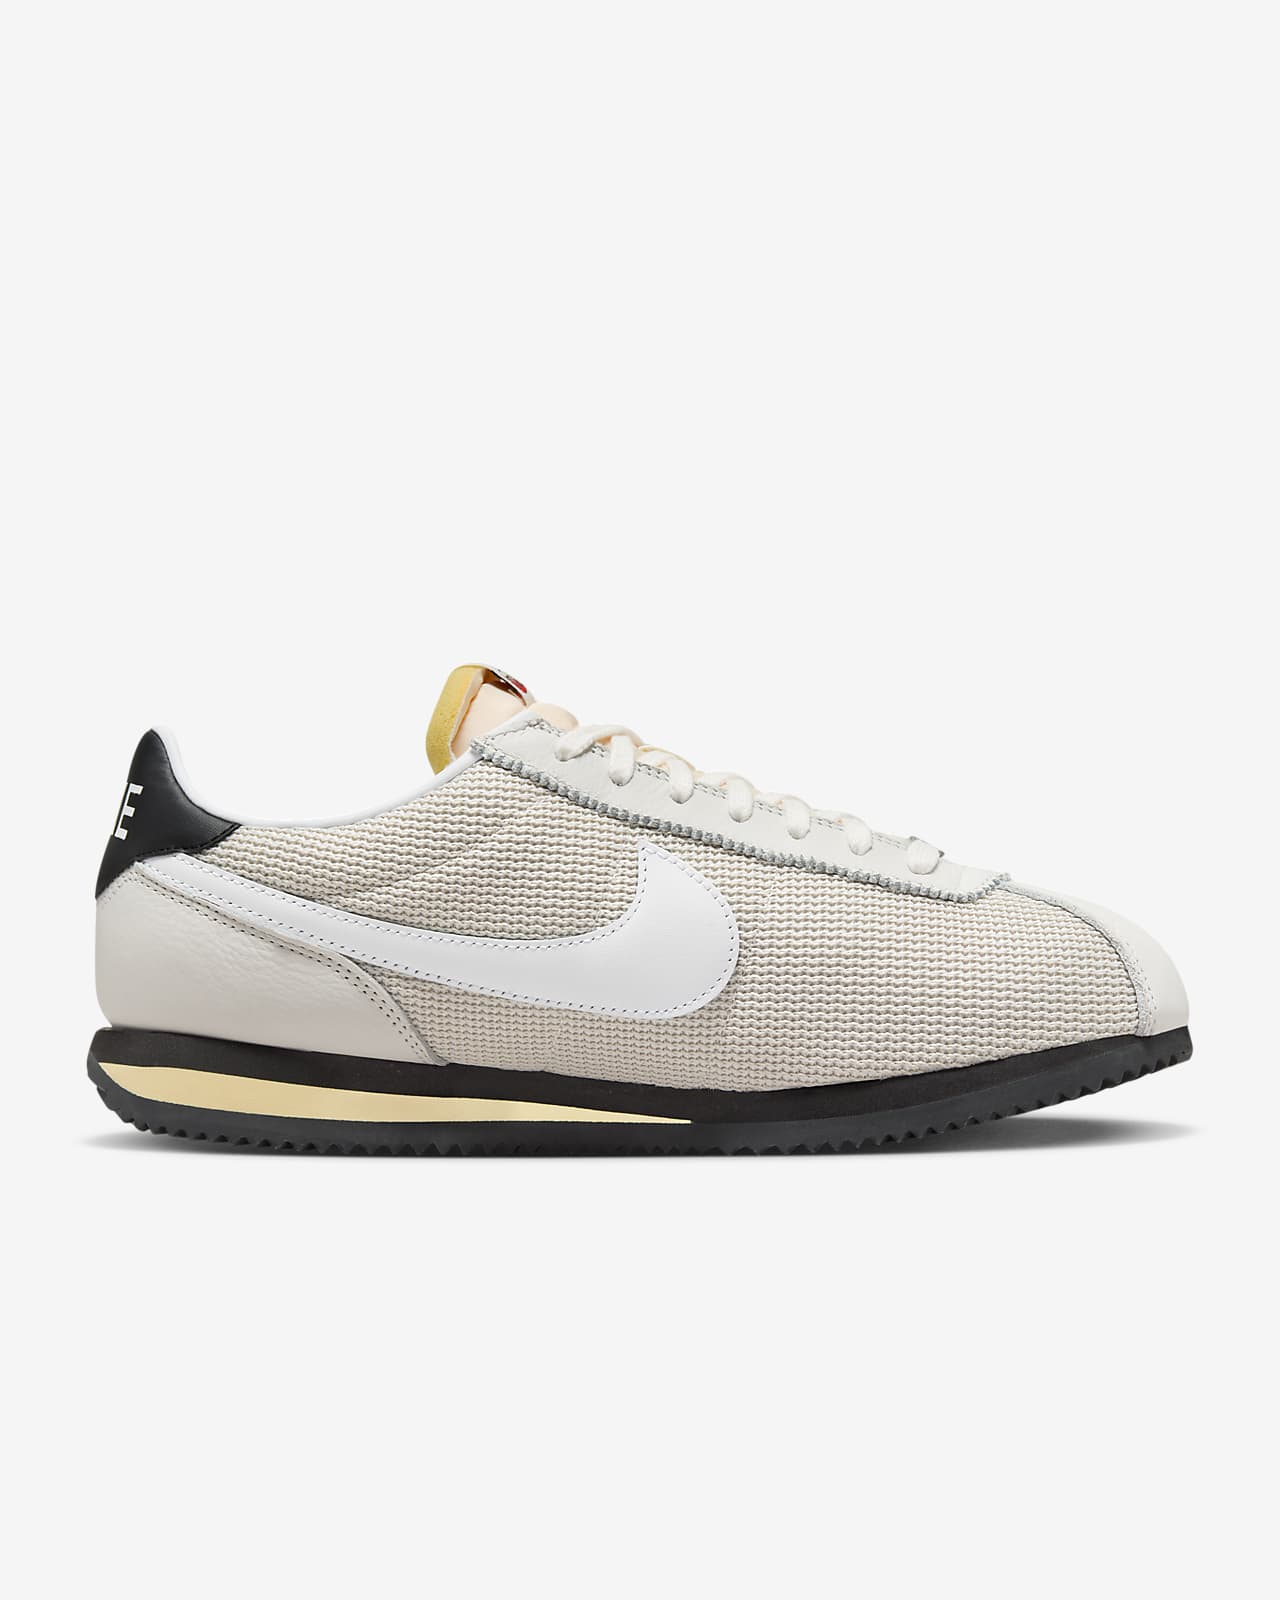 Nike Cortez Sizing: How Do They Fit? | The Sole Supplier